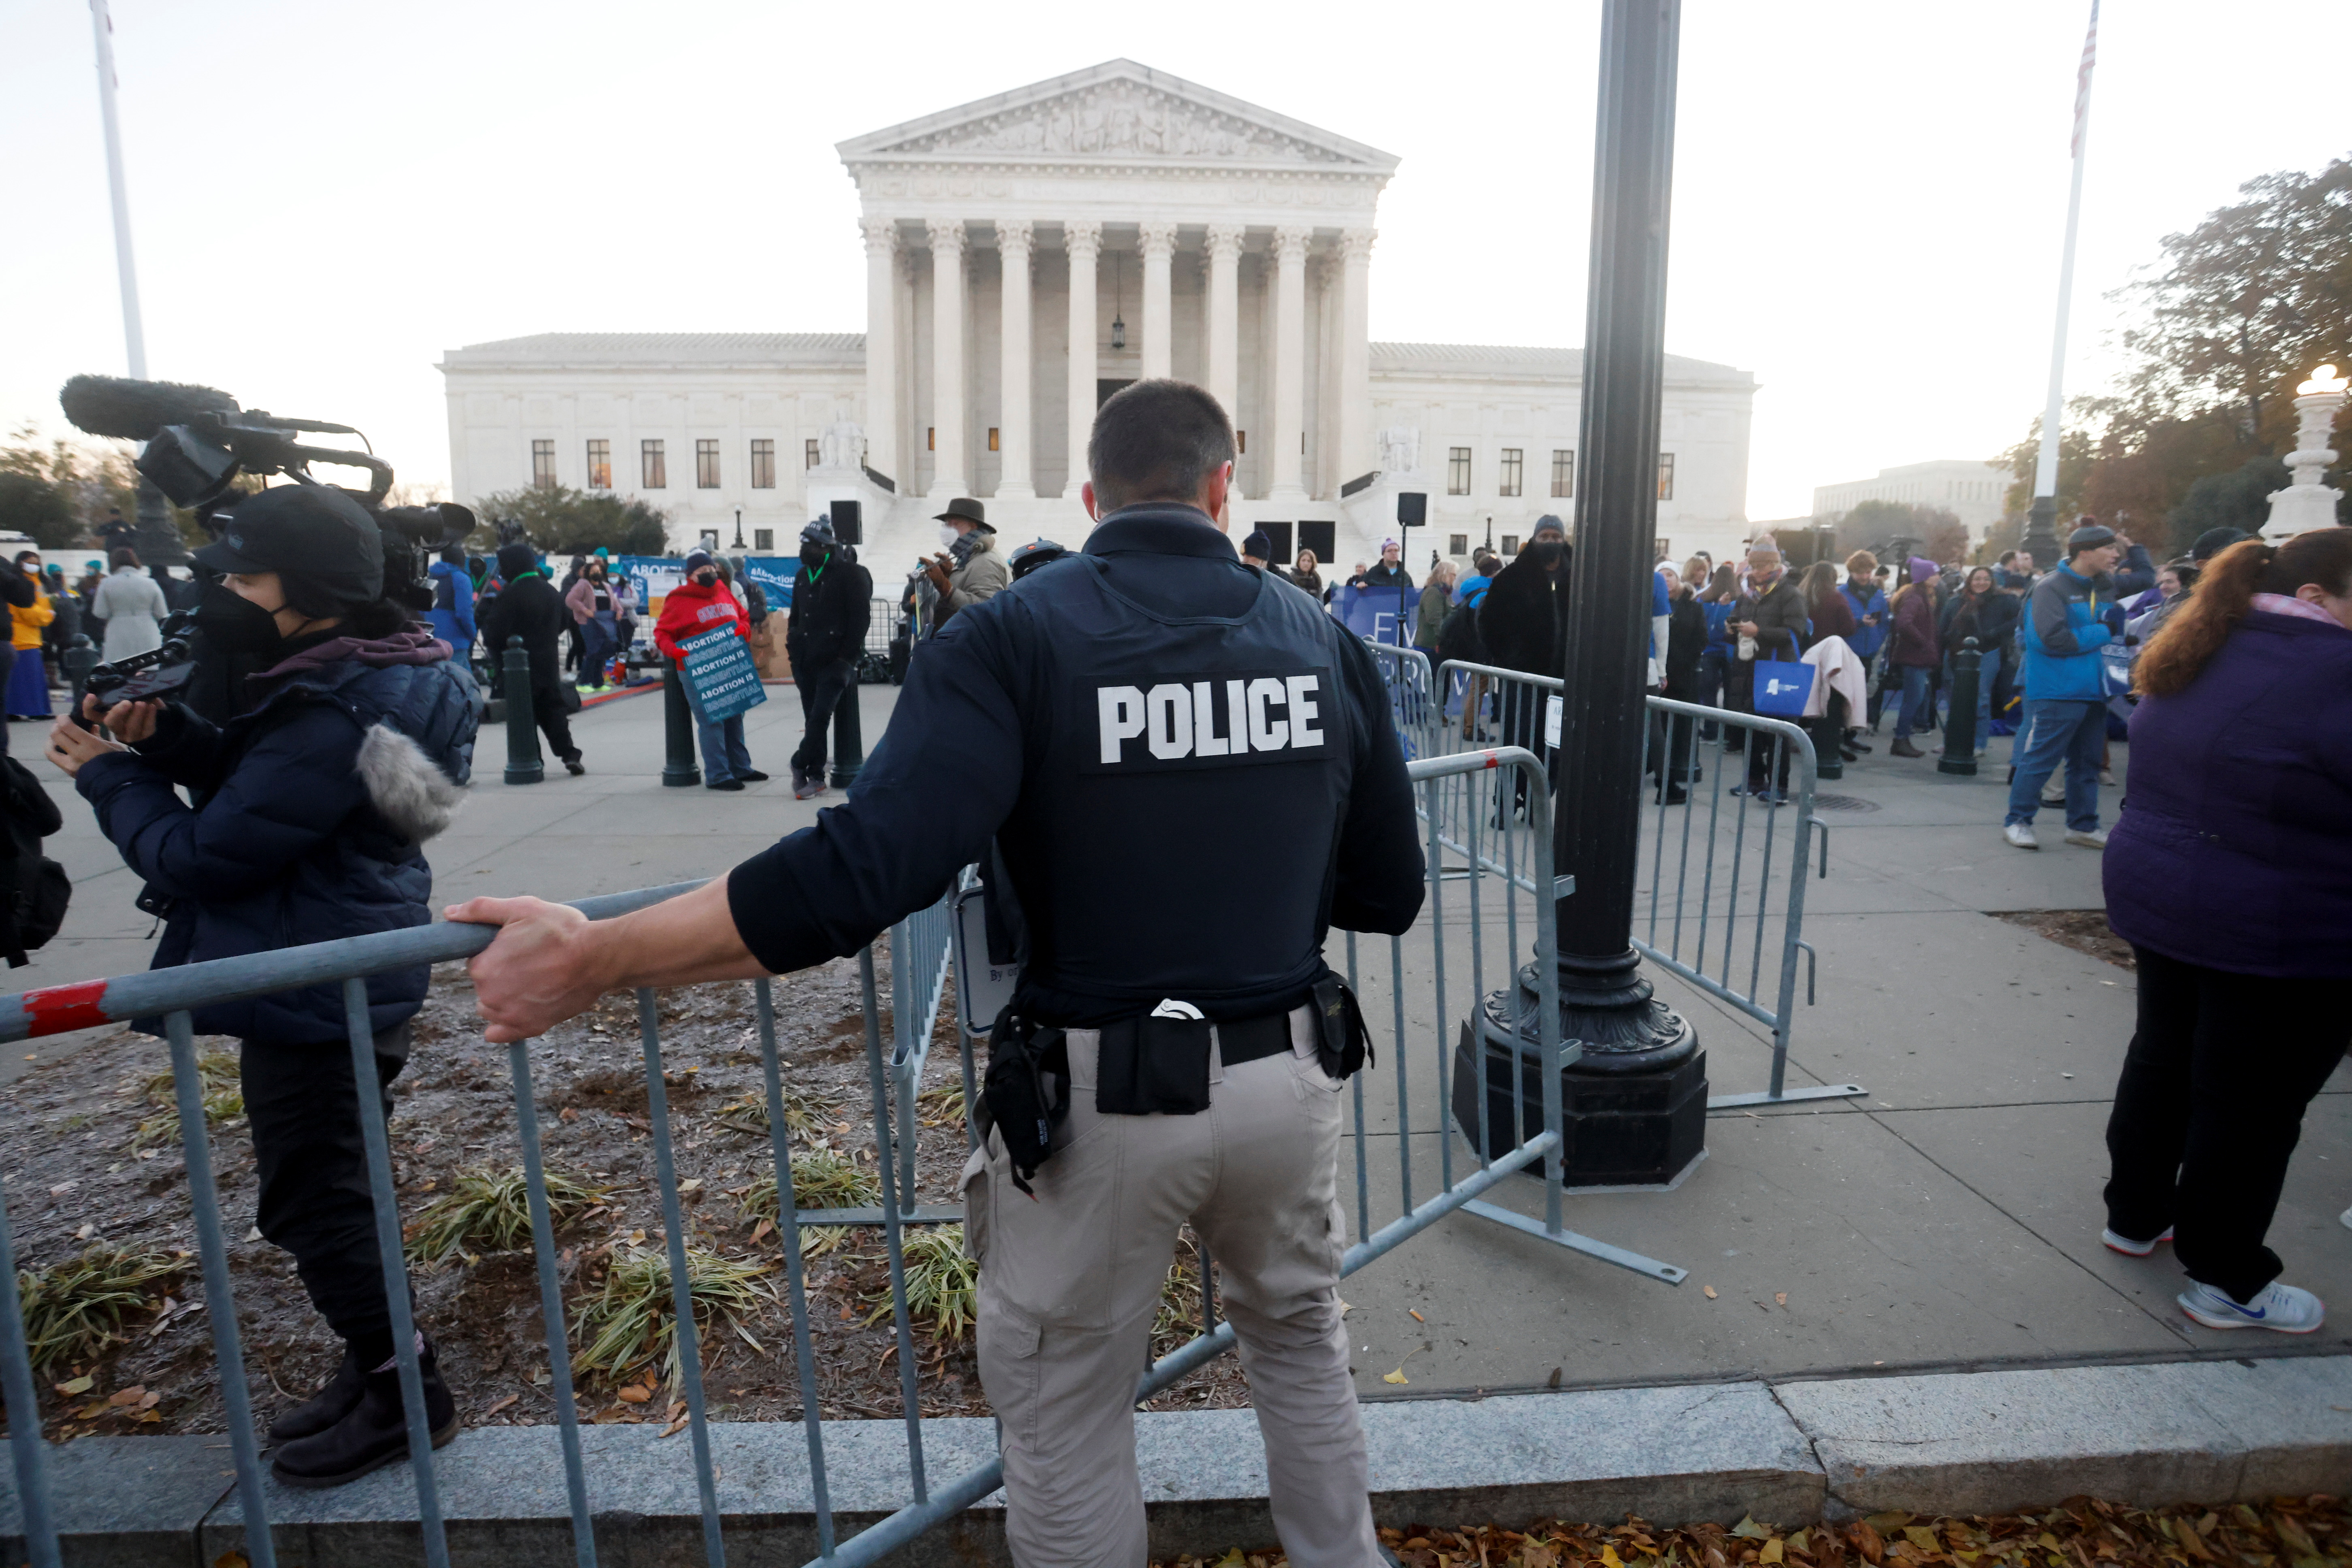 A Supreme Court Police officer erects a barrier between anti-abortion and pro-abortion rights protesters outside the court building, ahead of arguments in the Mississippi abortion rights case Dobbs v. Jackson Women's Health, in Washington, U.S., December 1, 2021. REUTERS/Jonathan Ernst